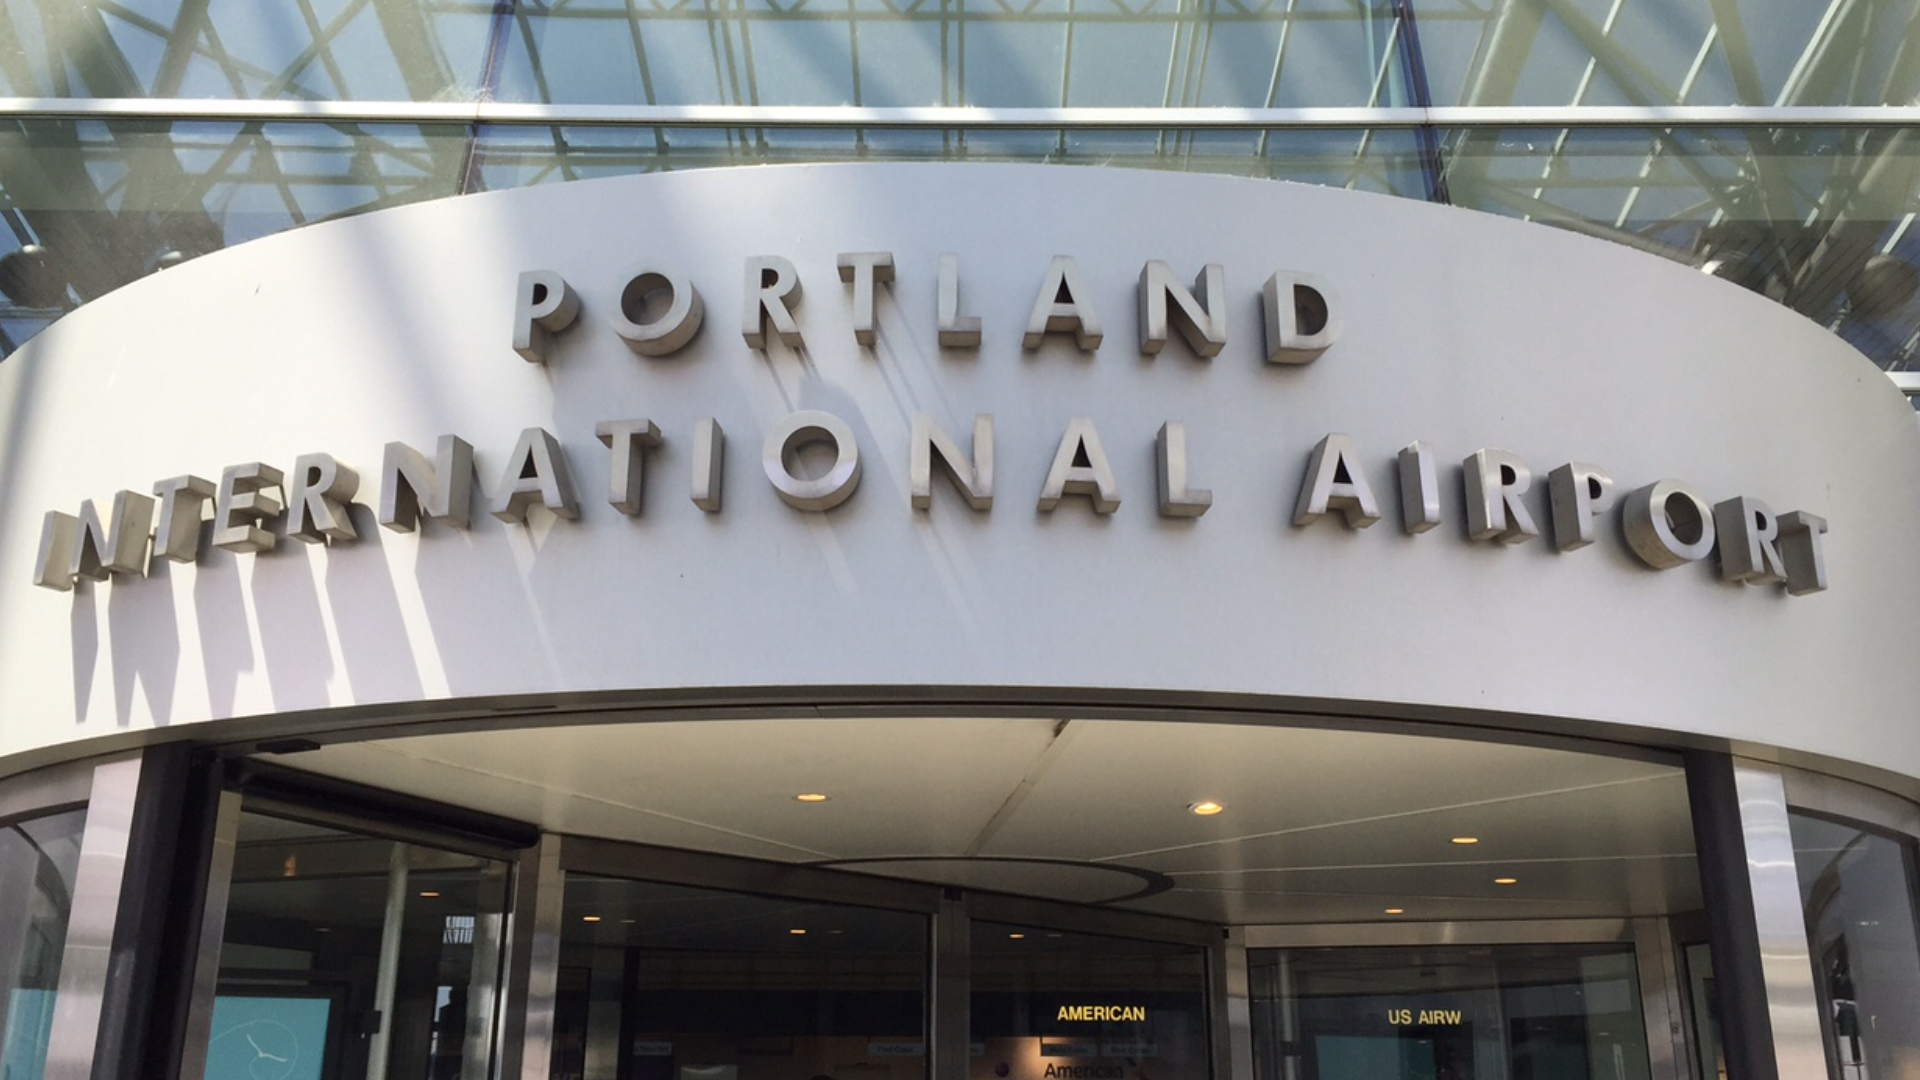 The suspect fired shots in the checkpoint area for the D and E concourses, the Port of Portland said. No one was injured.